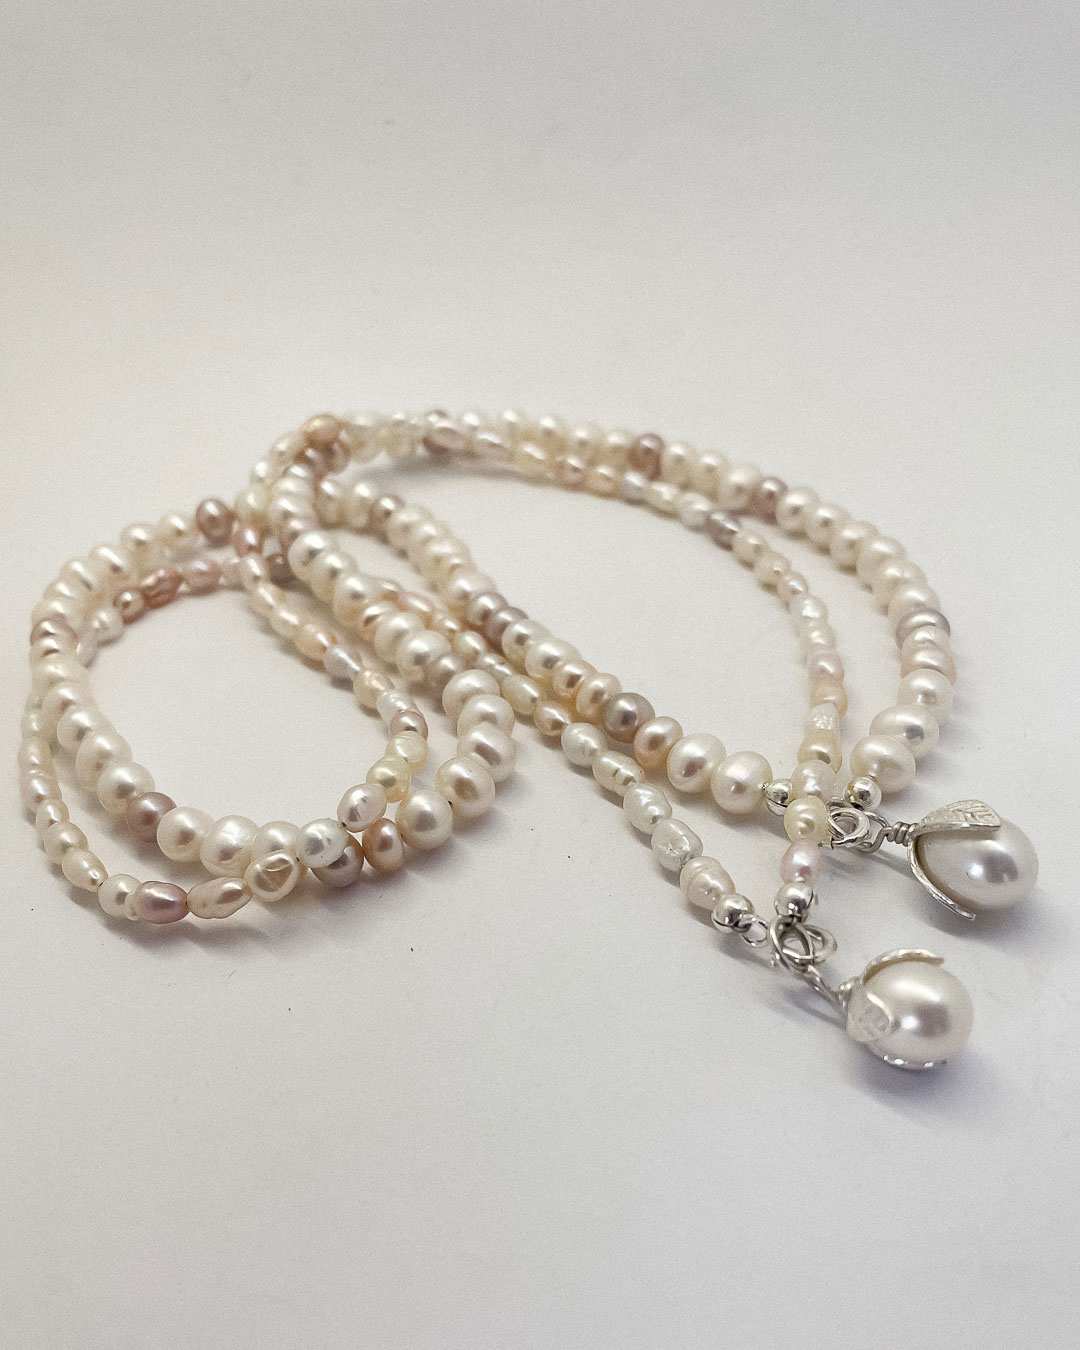 Two one-of-a-kind Glow Pearl Necklaces made from freshwater pearls - each with their own unique, colour, shape and characteristics with a Sterling Silver and Pearl pendant